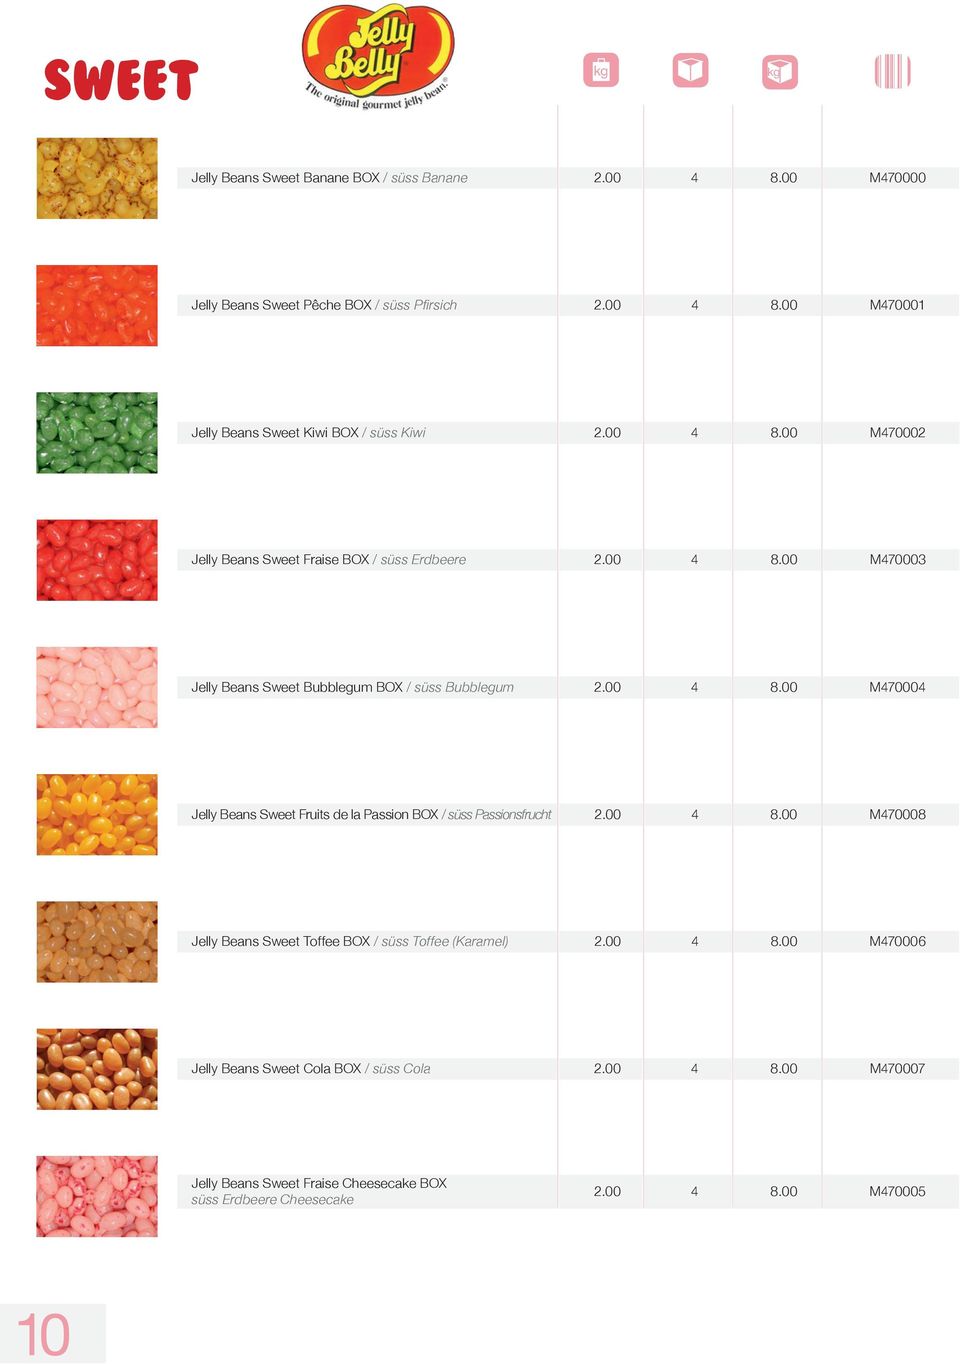 00 4 8.00 M470008 Jelly Beans Sweet Toffee BOX / süss Toffee (Karamel) 2.00 4 8.00 M470006 Jelly Beans Sweet Cola BOX / süss Cola 2.00 4 8.00 M470007 Jelly Beans Sweet Fraise Cheesecake BOX süss Erdbeere Cheesecake 2.